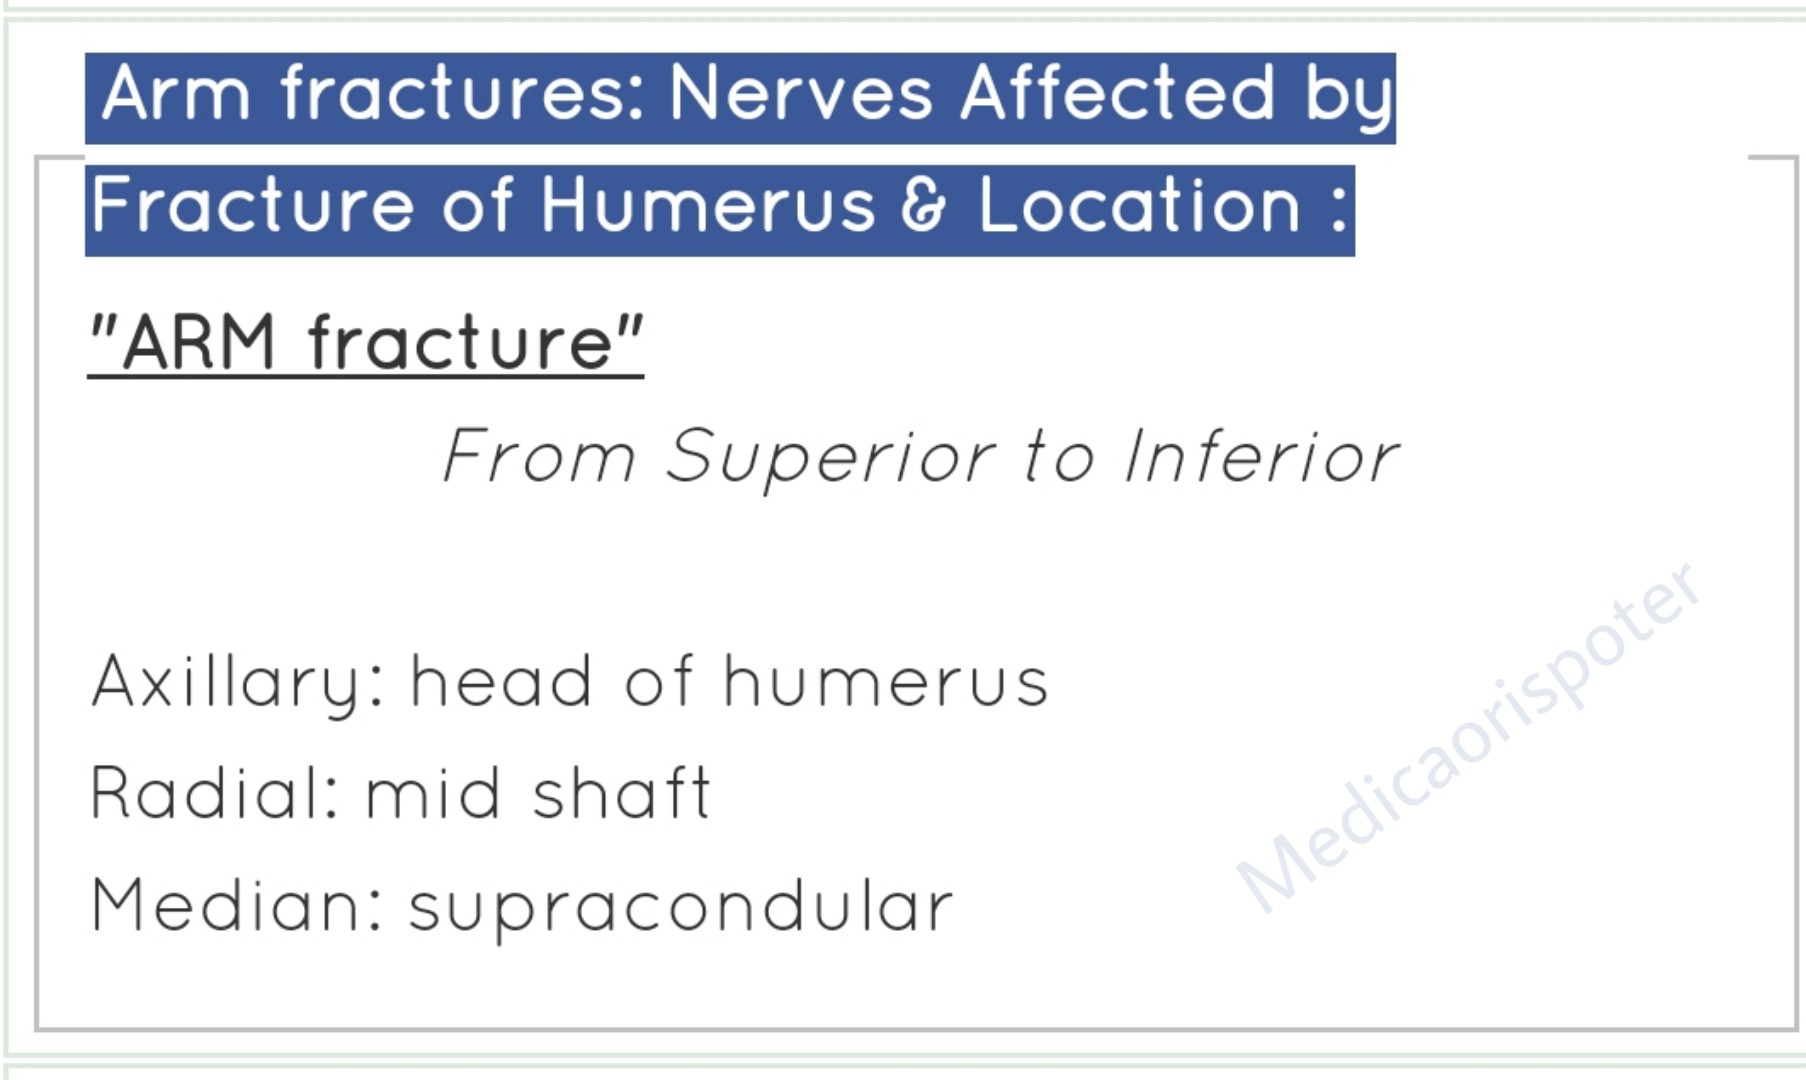 Nerves affected by fracture of Humerus